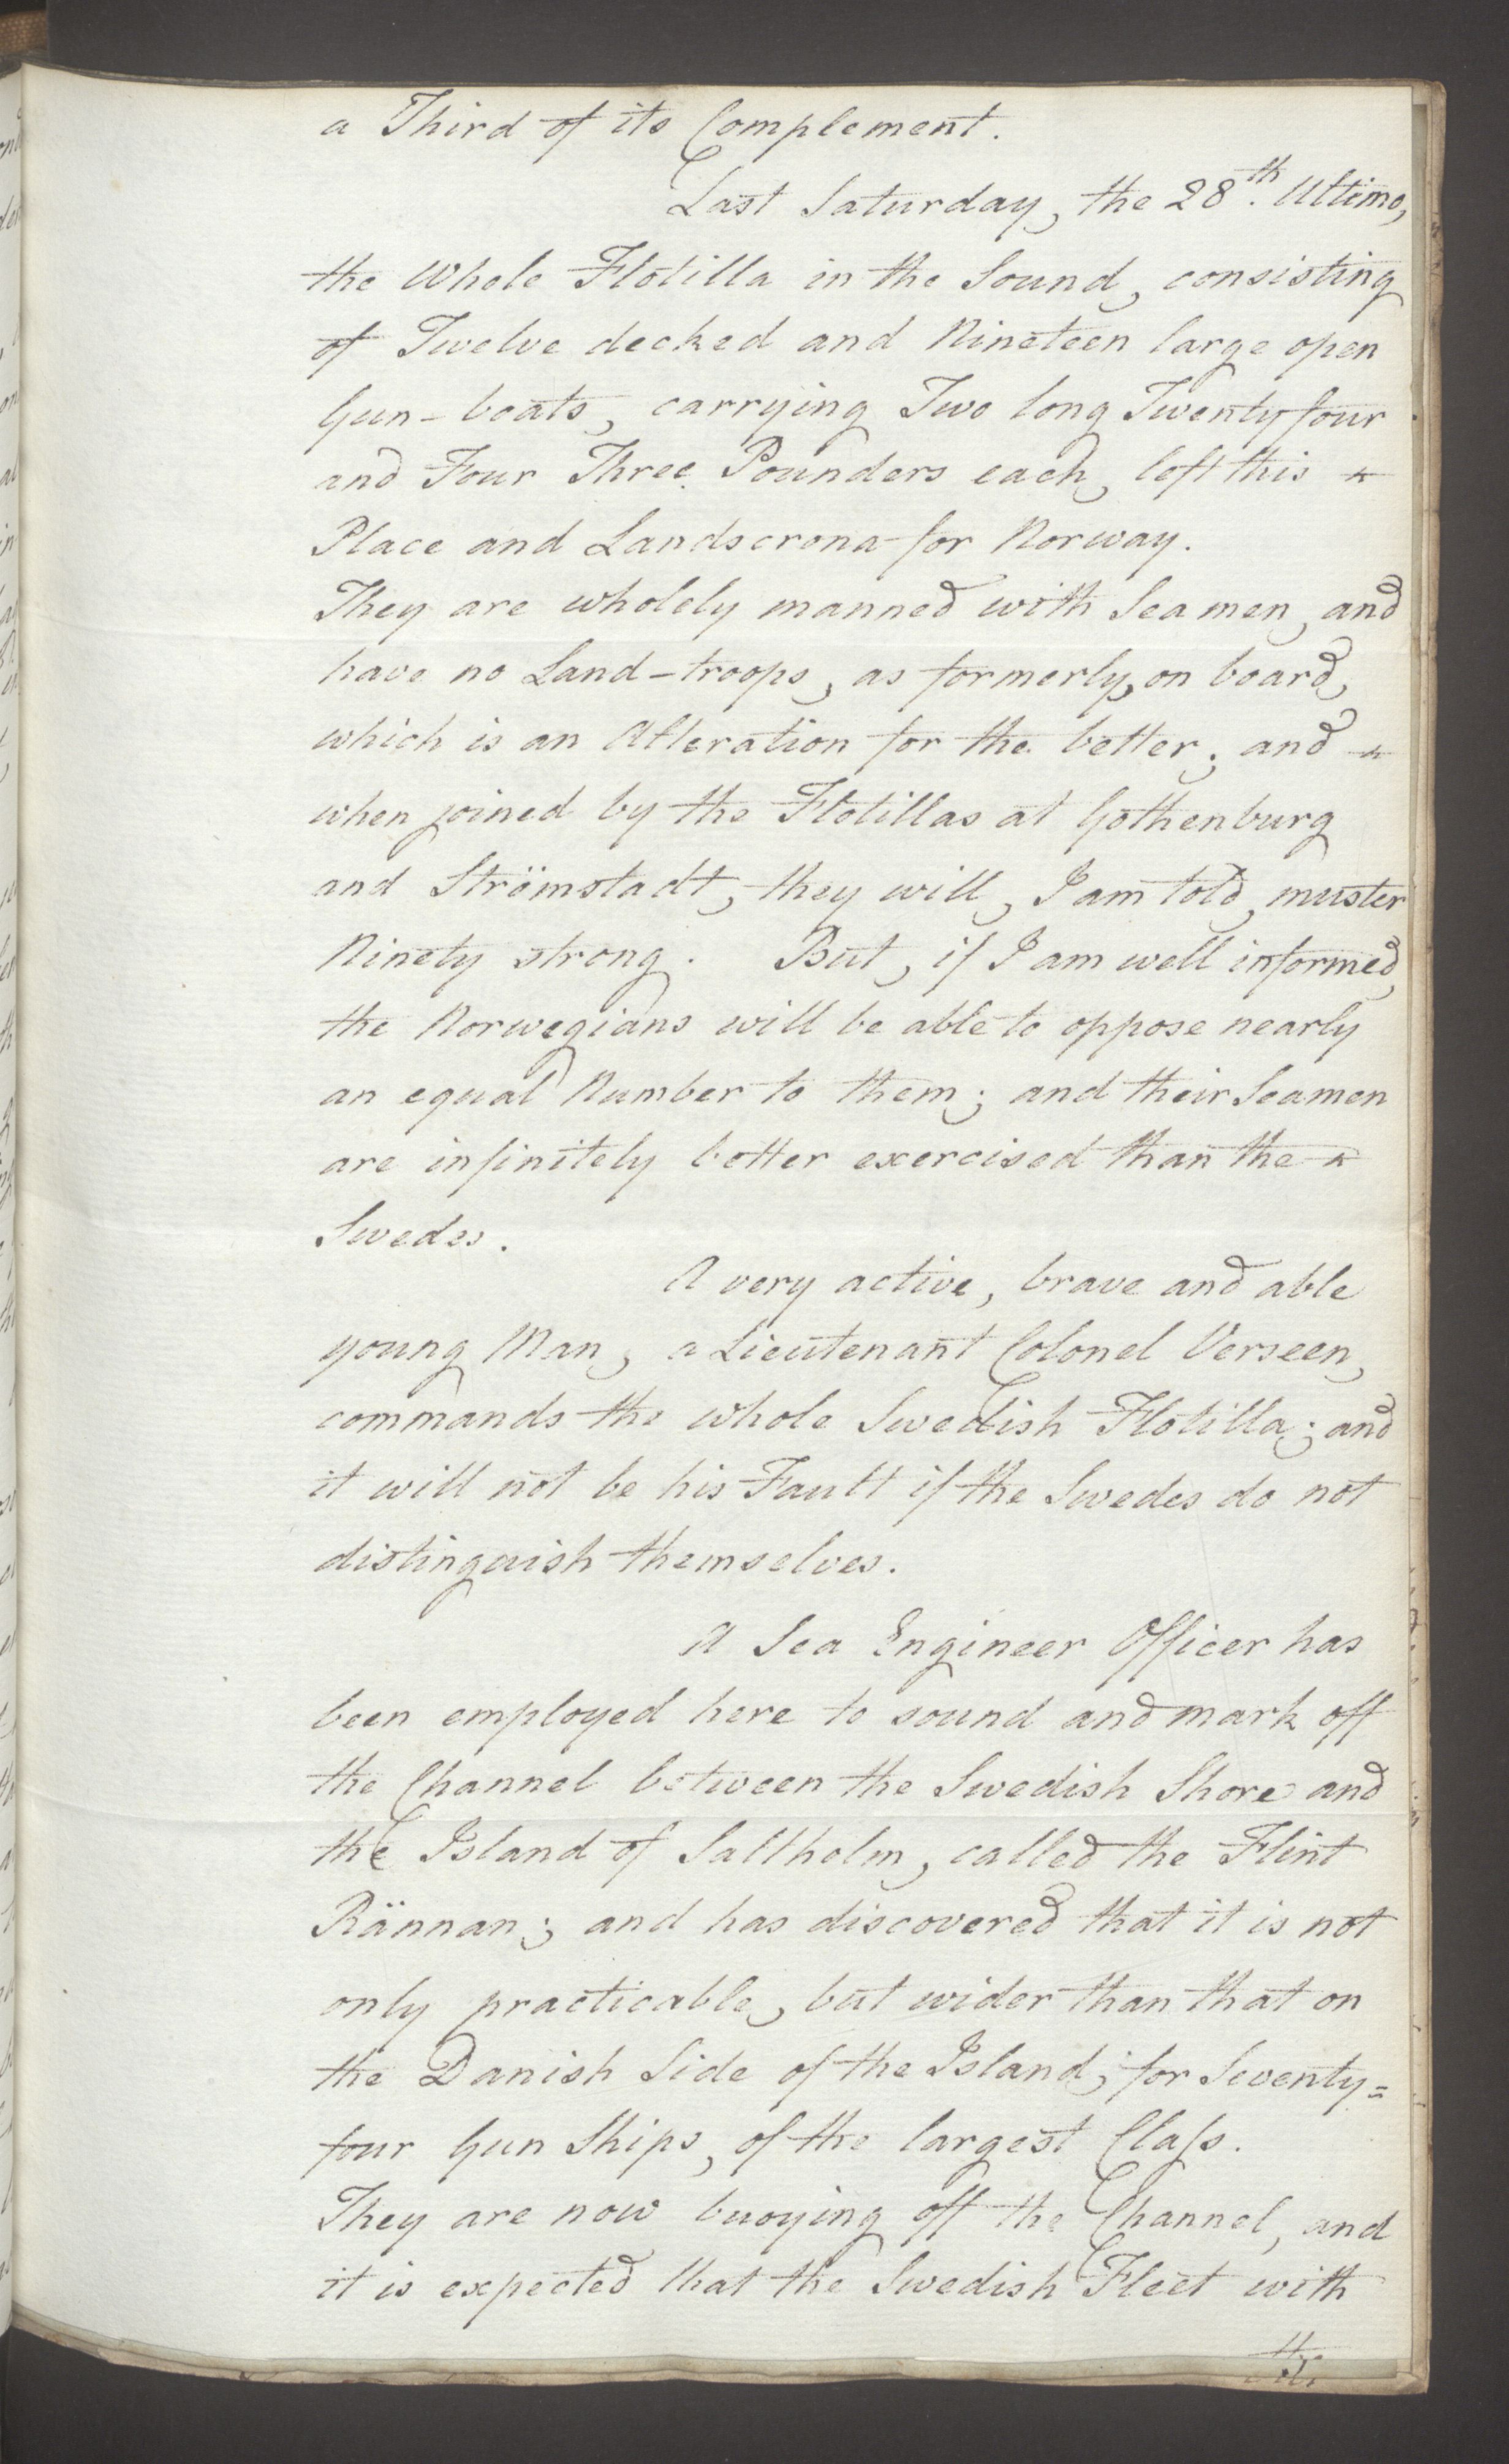 Foreign Office*, UKA/-/FO 38/16: Sir C. Gordon. Reports from Malmö, Jonkoping, and Helsingborg, 1814, p. 59